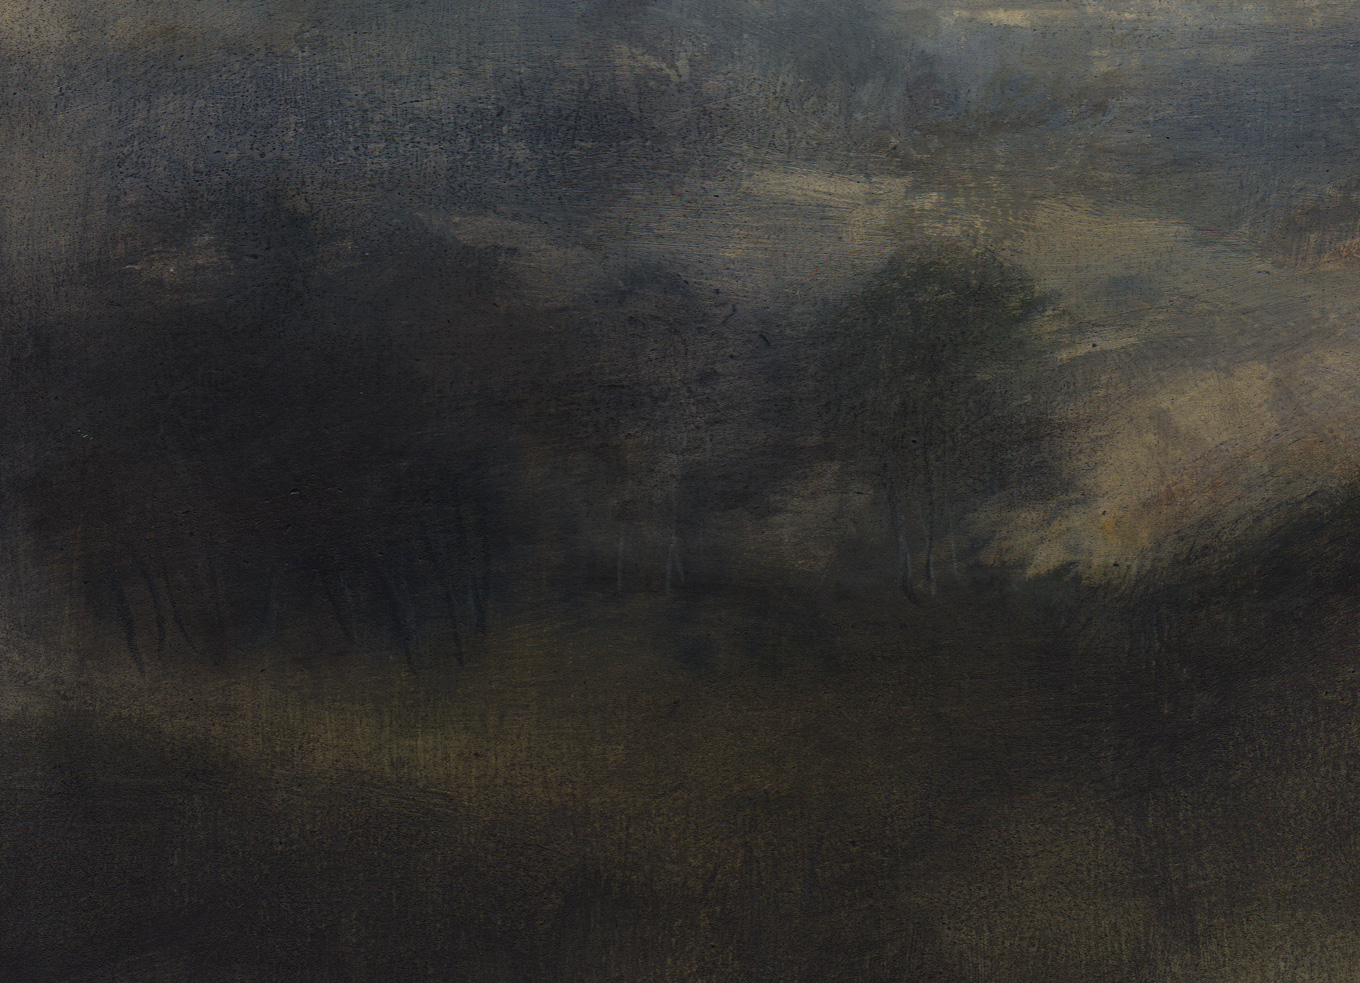 L997 - Nicholas Herbert, British Artist, landscape painting of trees along a low ridge between the villages of Harlington and Sharpenhoe, mixed media 2017.